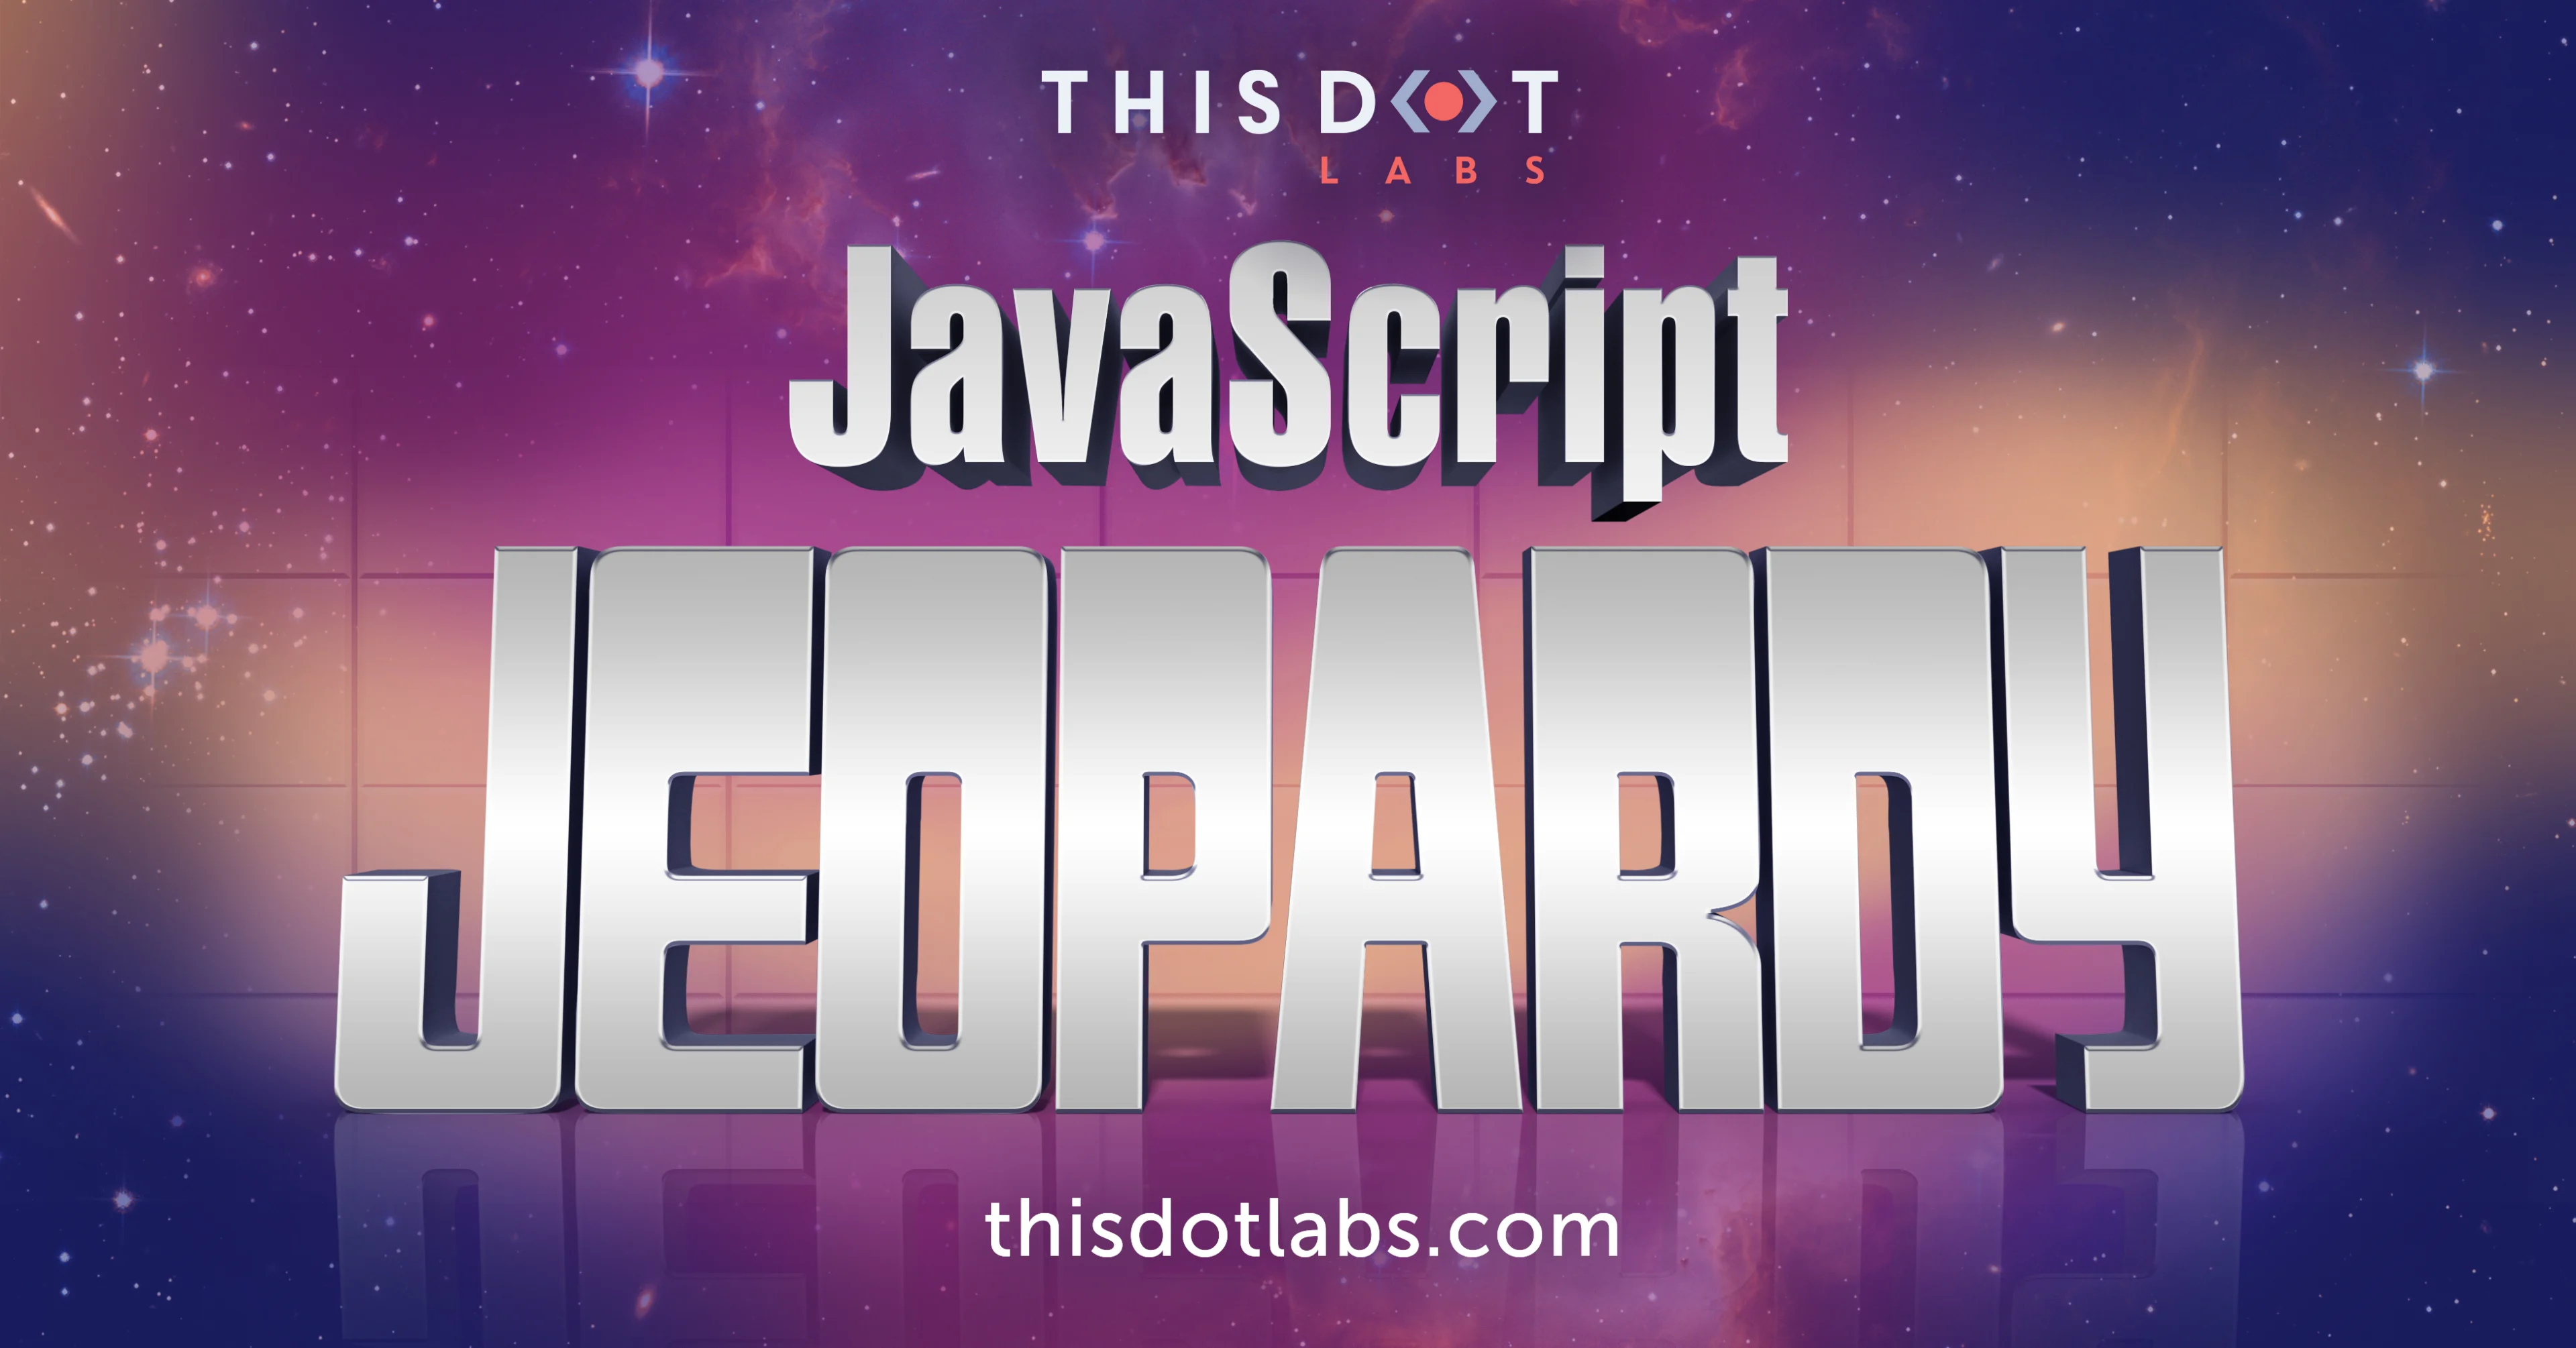 JavaScript Jeopardy - Prizes, Coding Competitions, and More! cover image